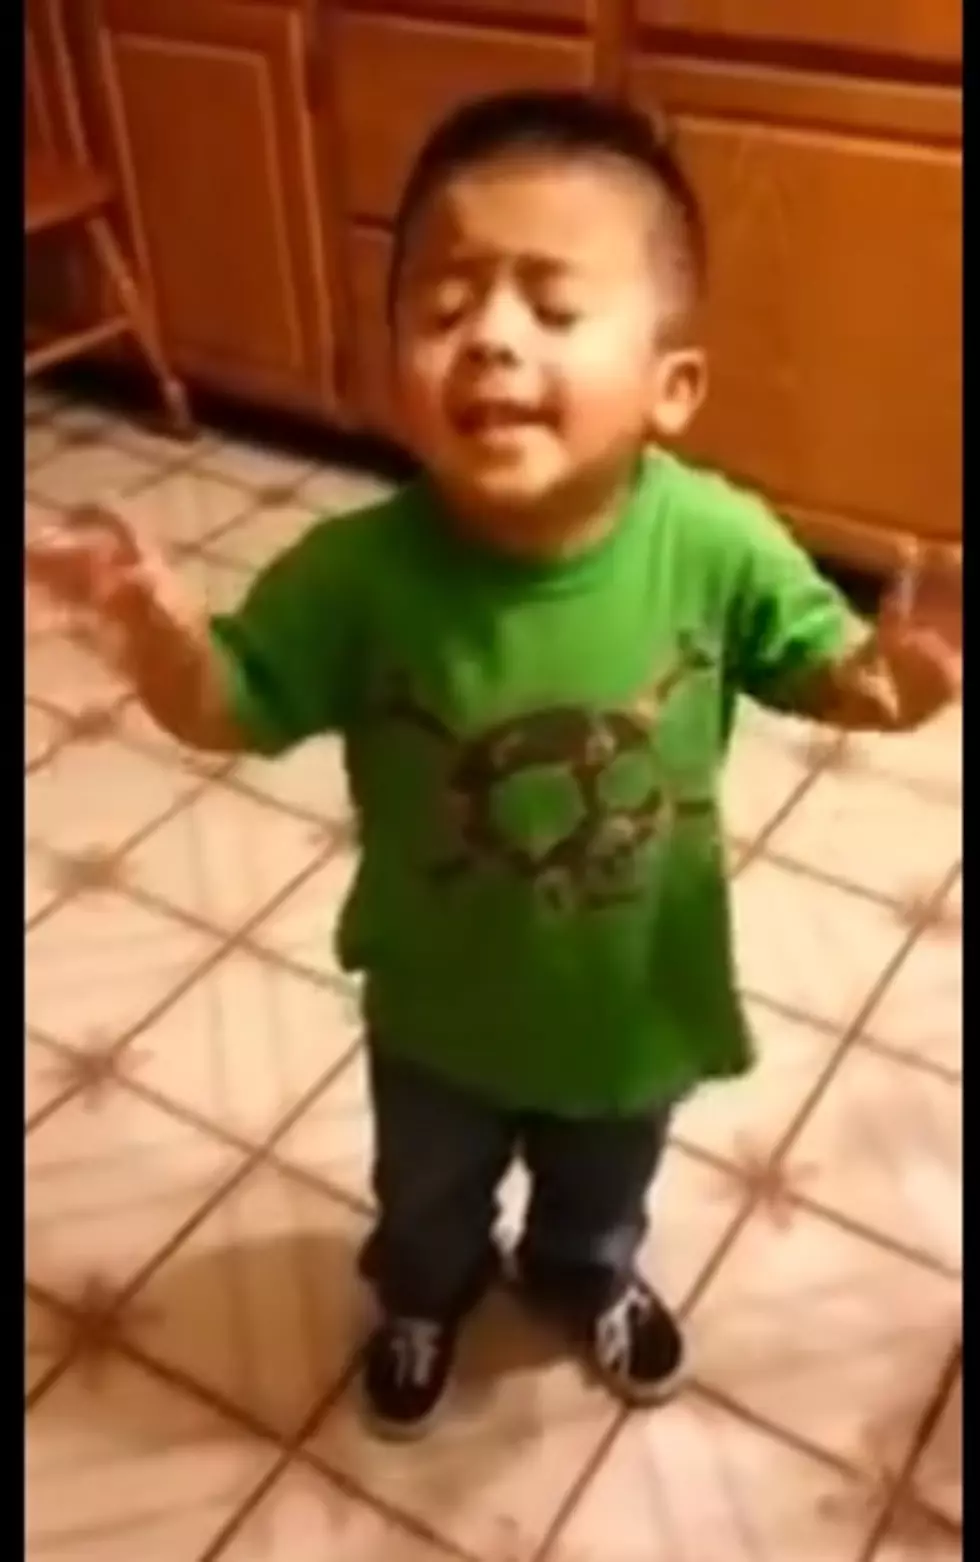 This Kid Is Really Trying To Get His Mom To Listen [Video]